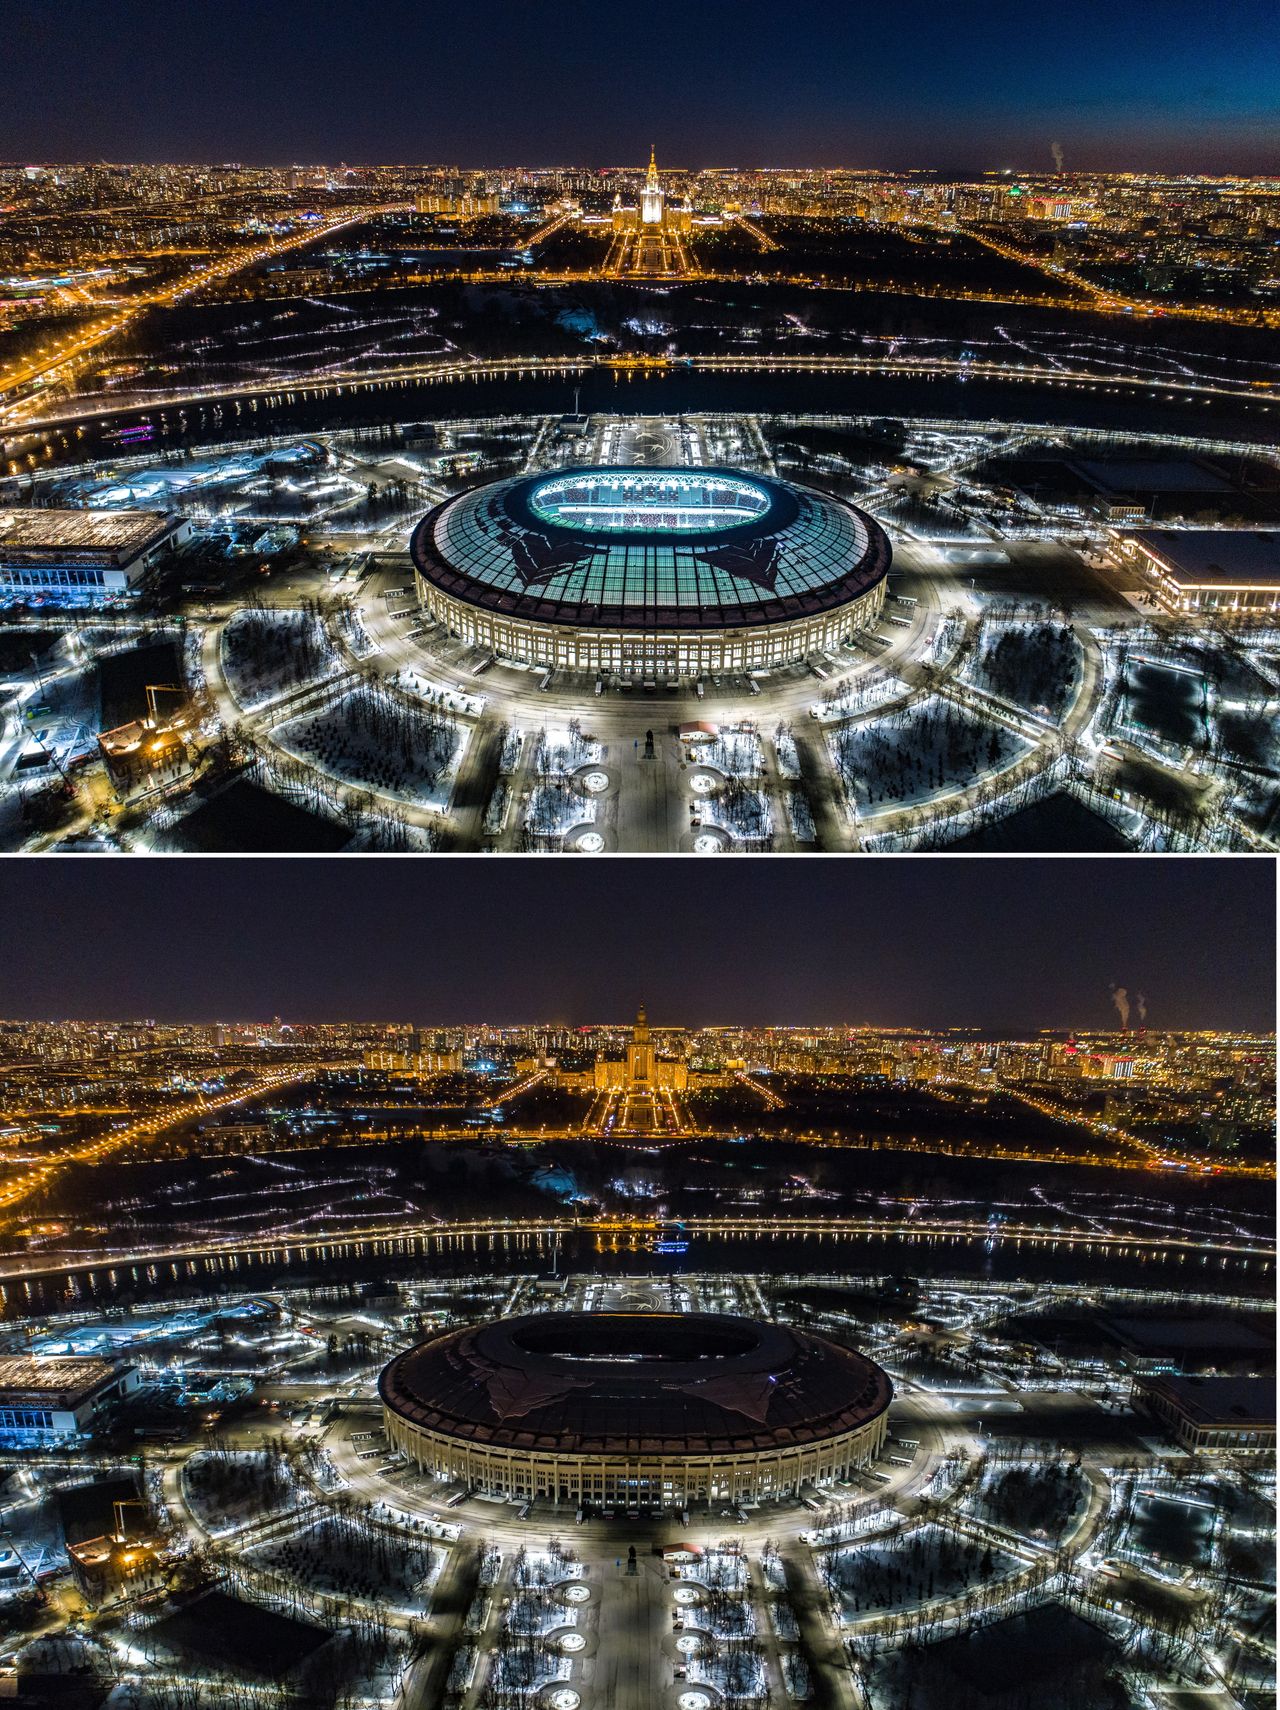 Moscow's Luzhniki Stadium, before and after its lights were turned off.